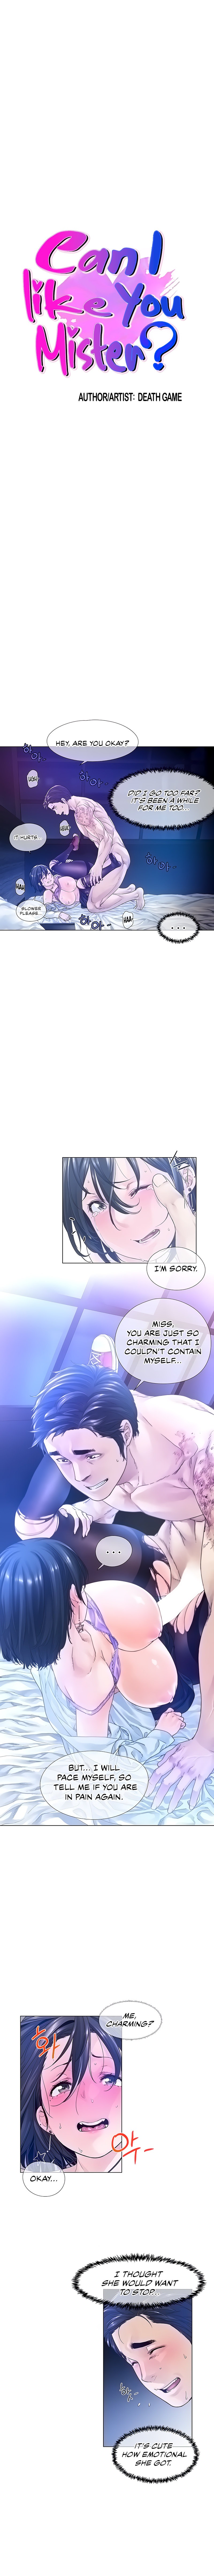 Winter short story: Can I like you Mister? - Chapter 5 Page 1